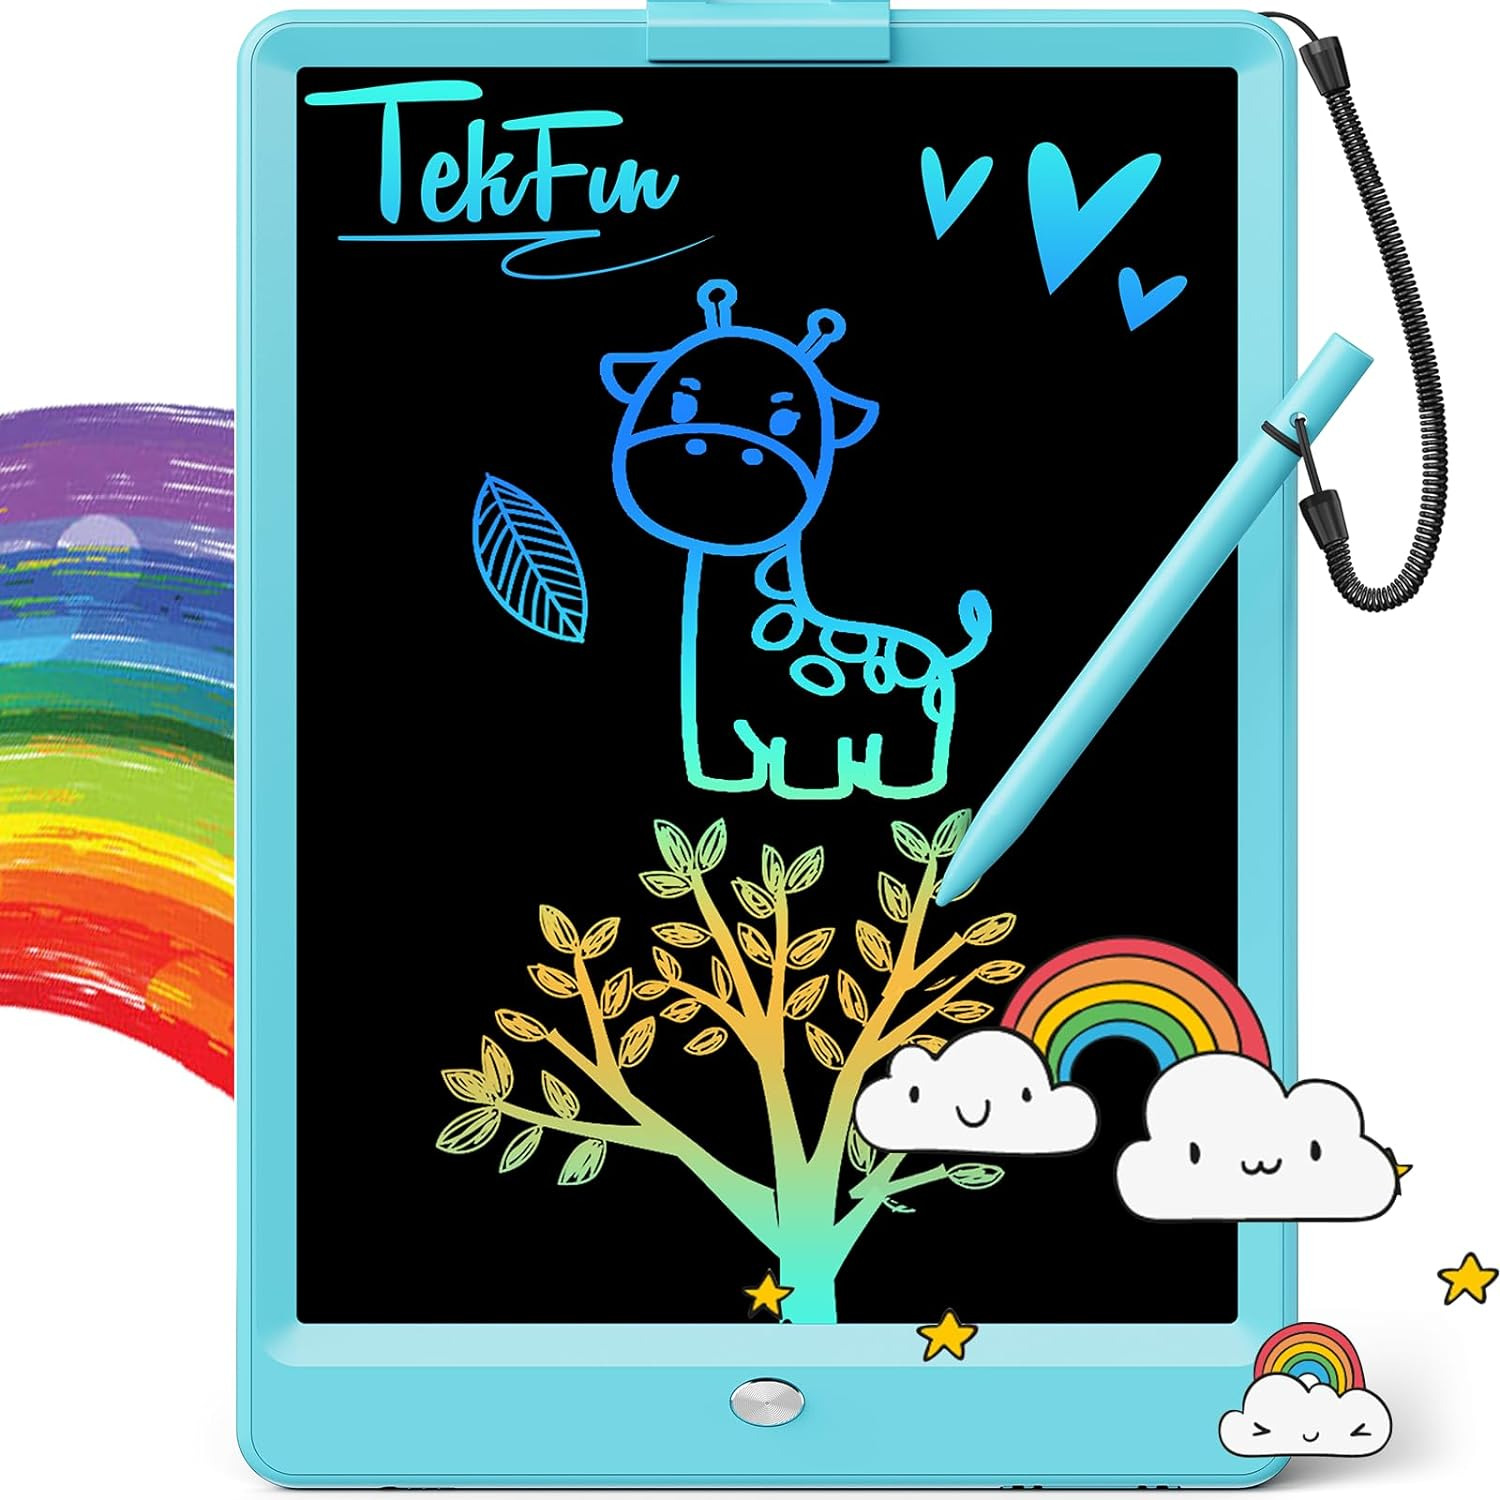 TEKFUN LCD Writing Tablet Doodle Board, 10Inch Colorful Drawing Tablet Writing P